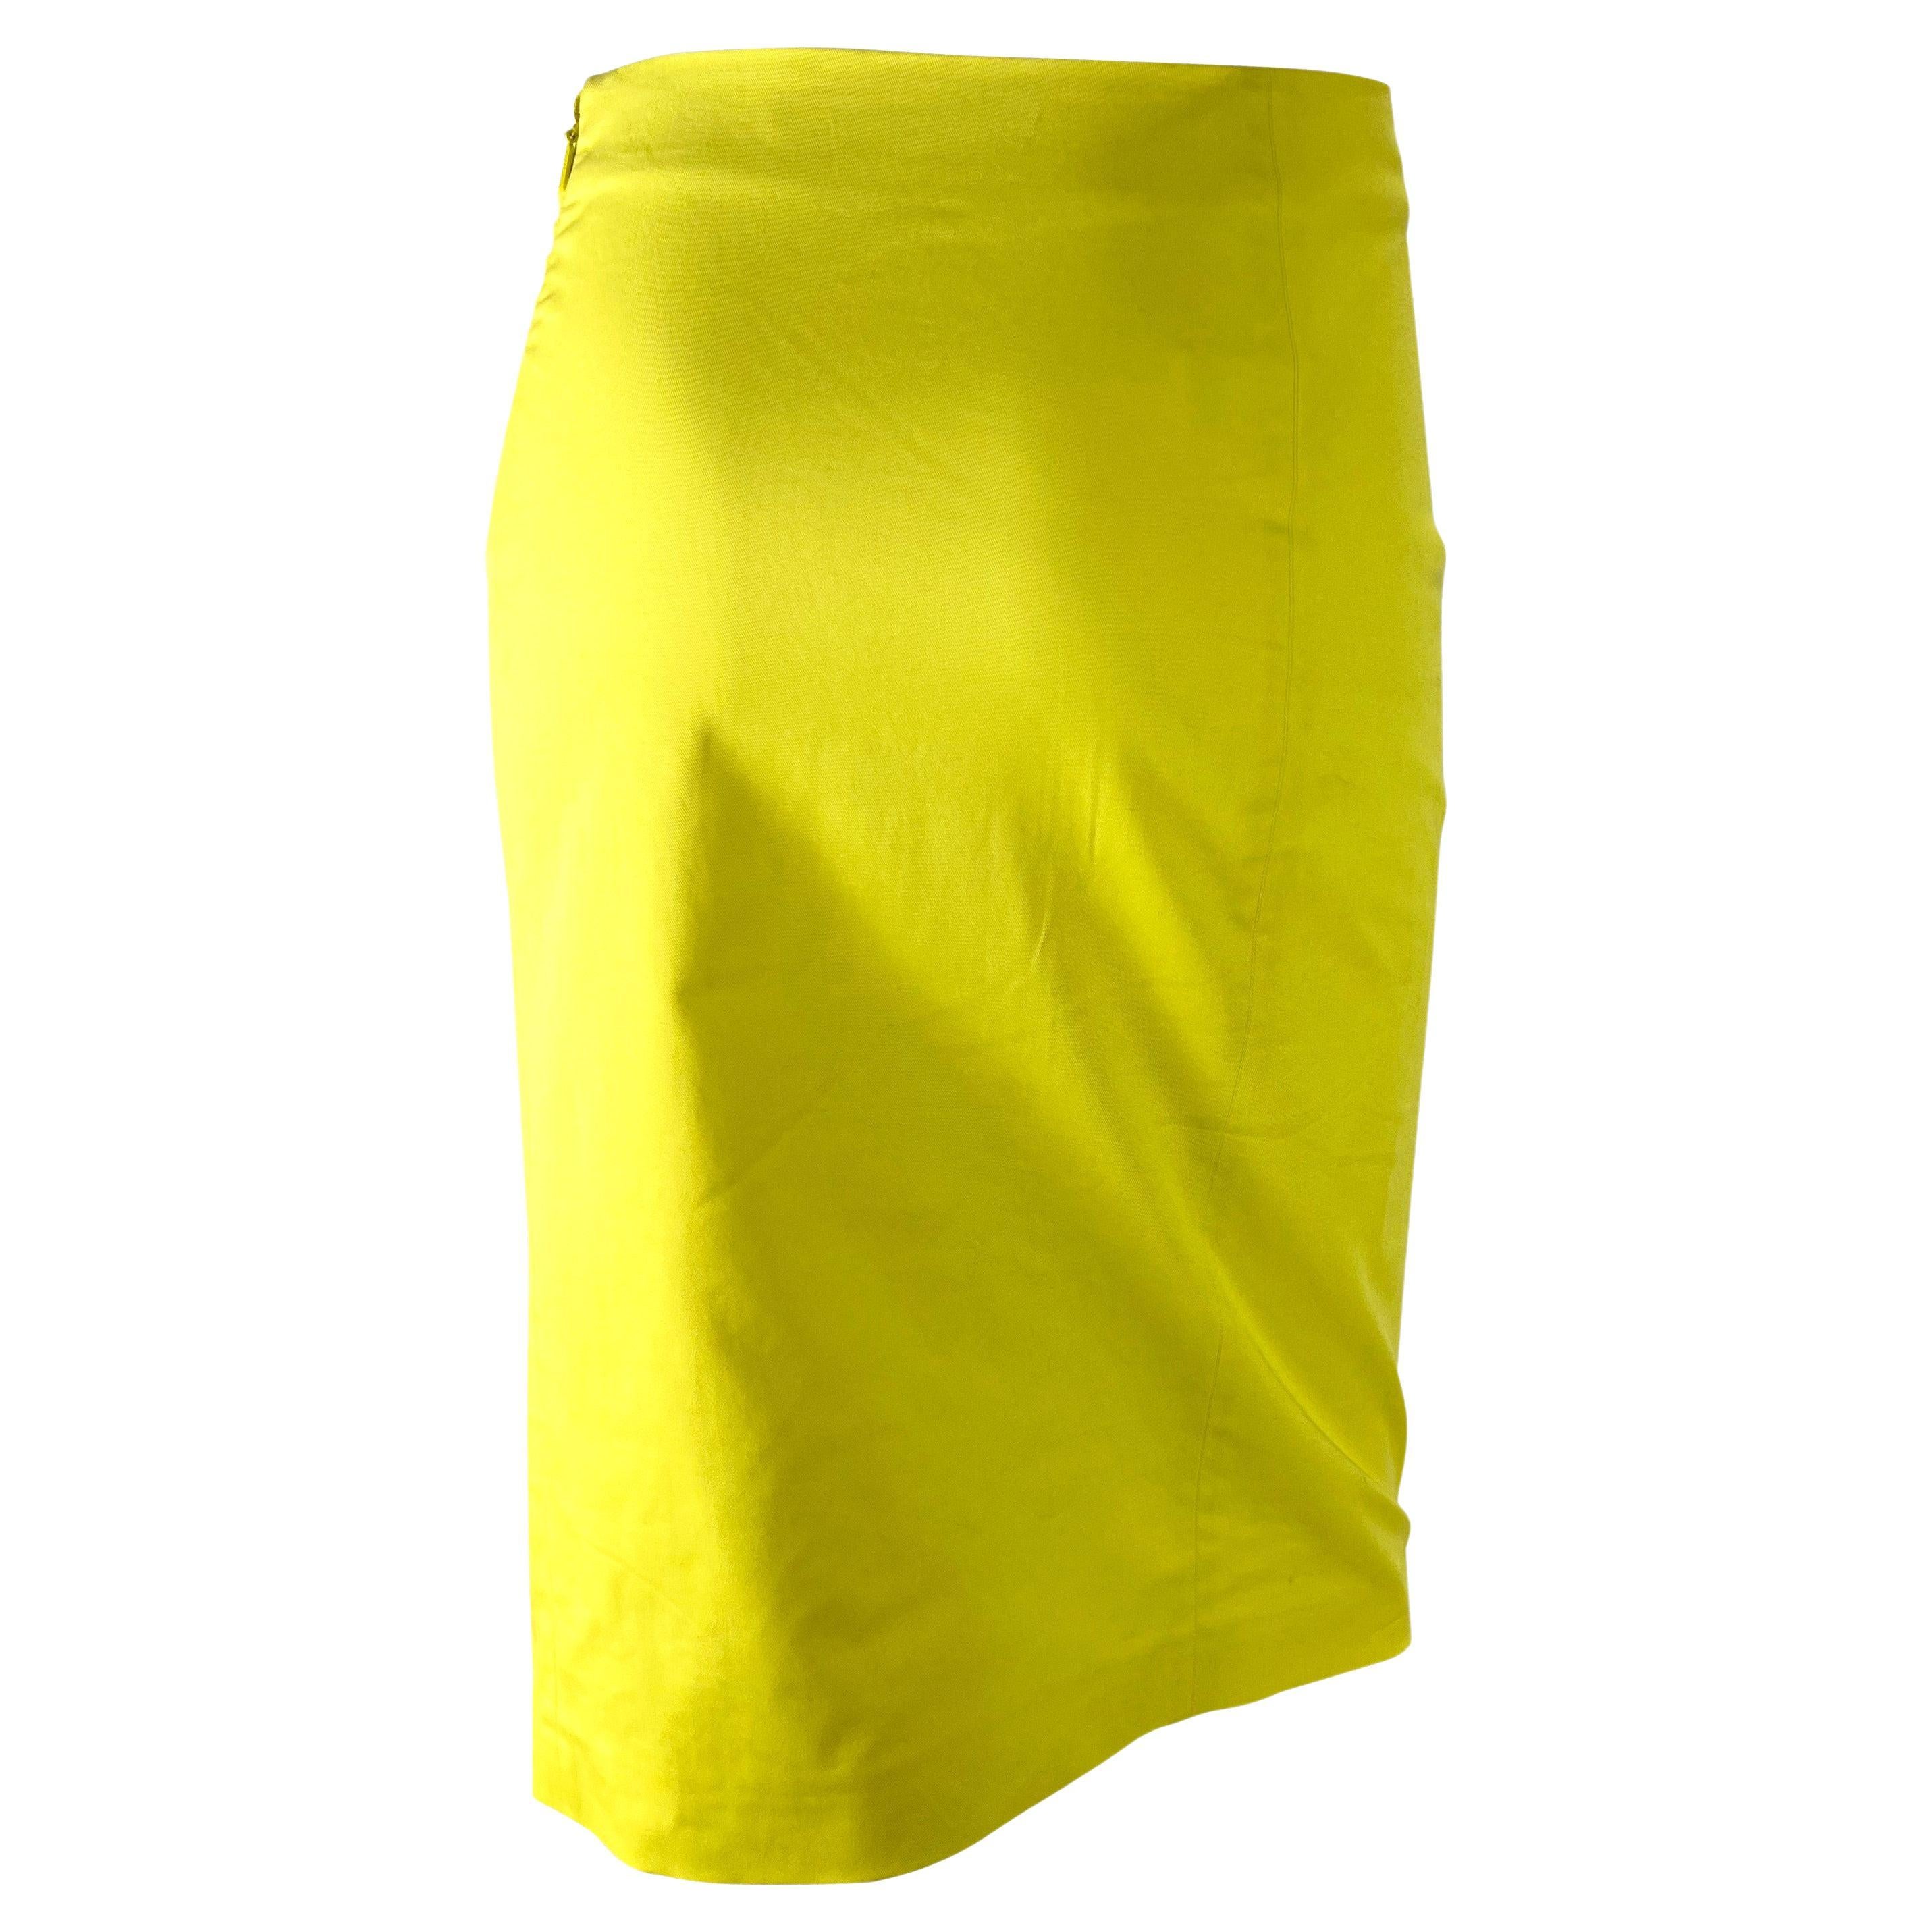 S/S 2000 Gucci by Tom Ford Yellow Cotton Pencil Skirt Leather Bow ...